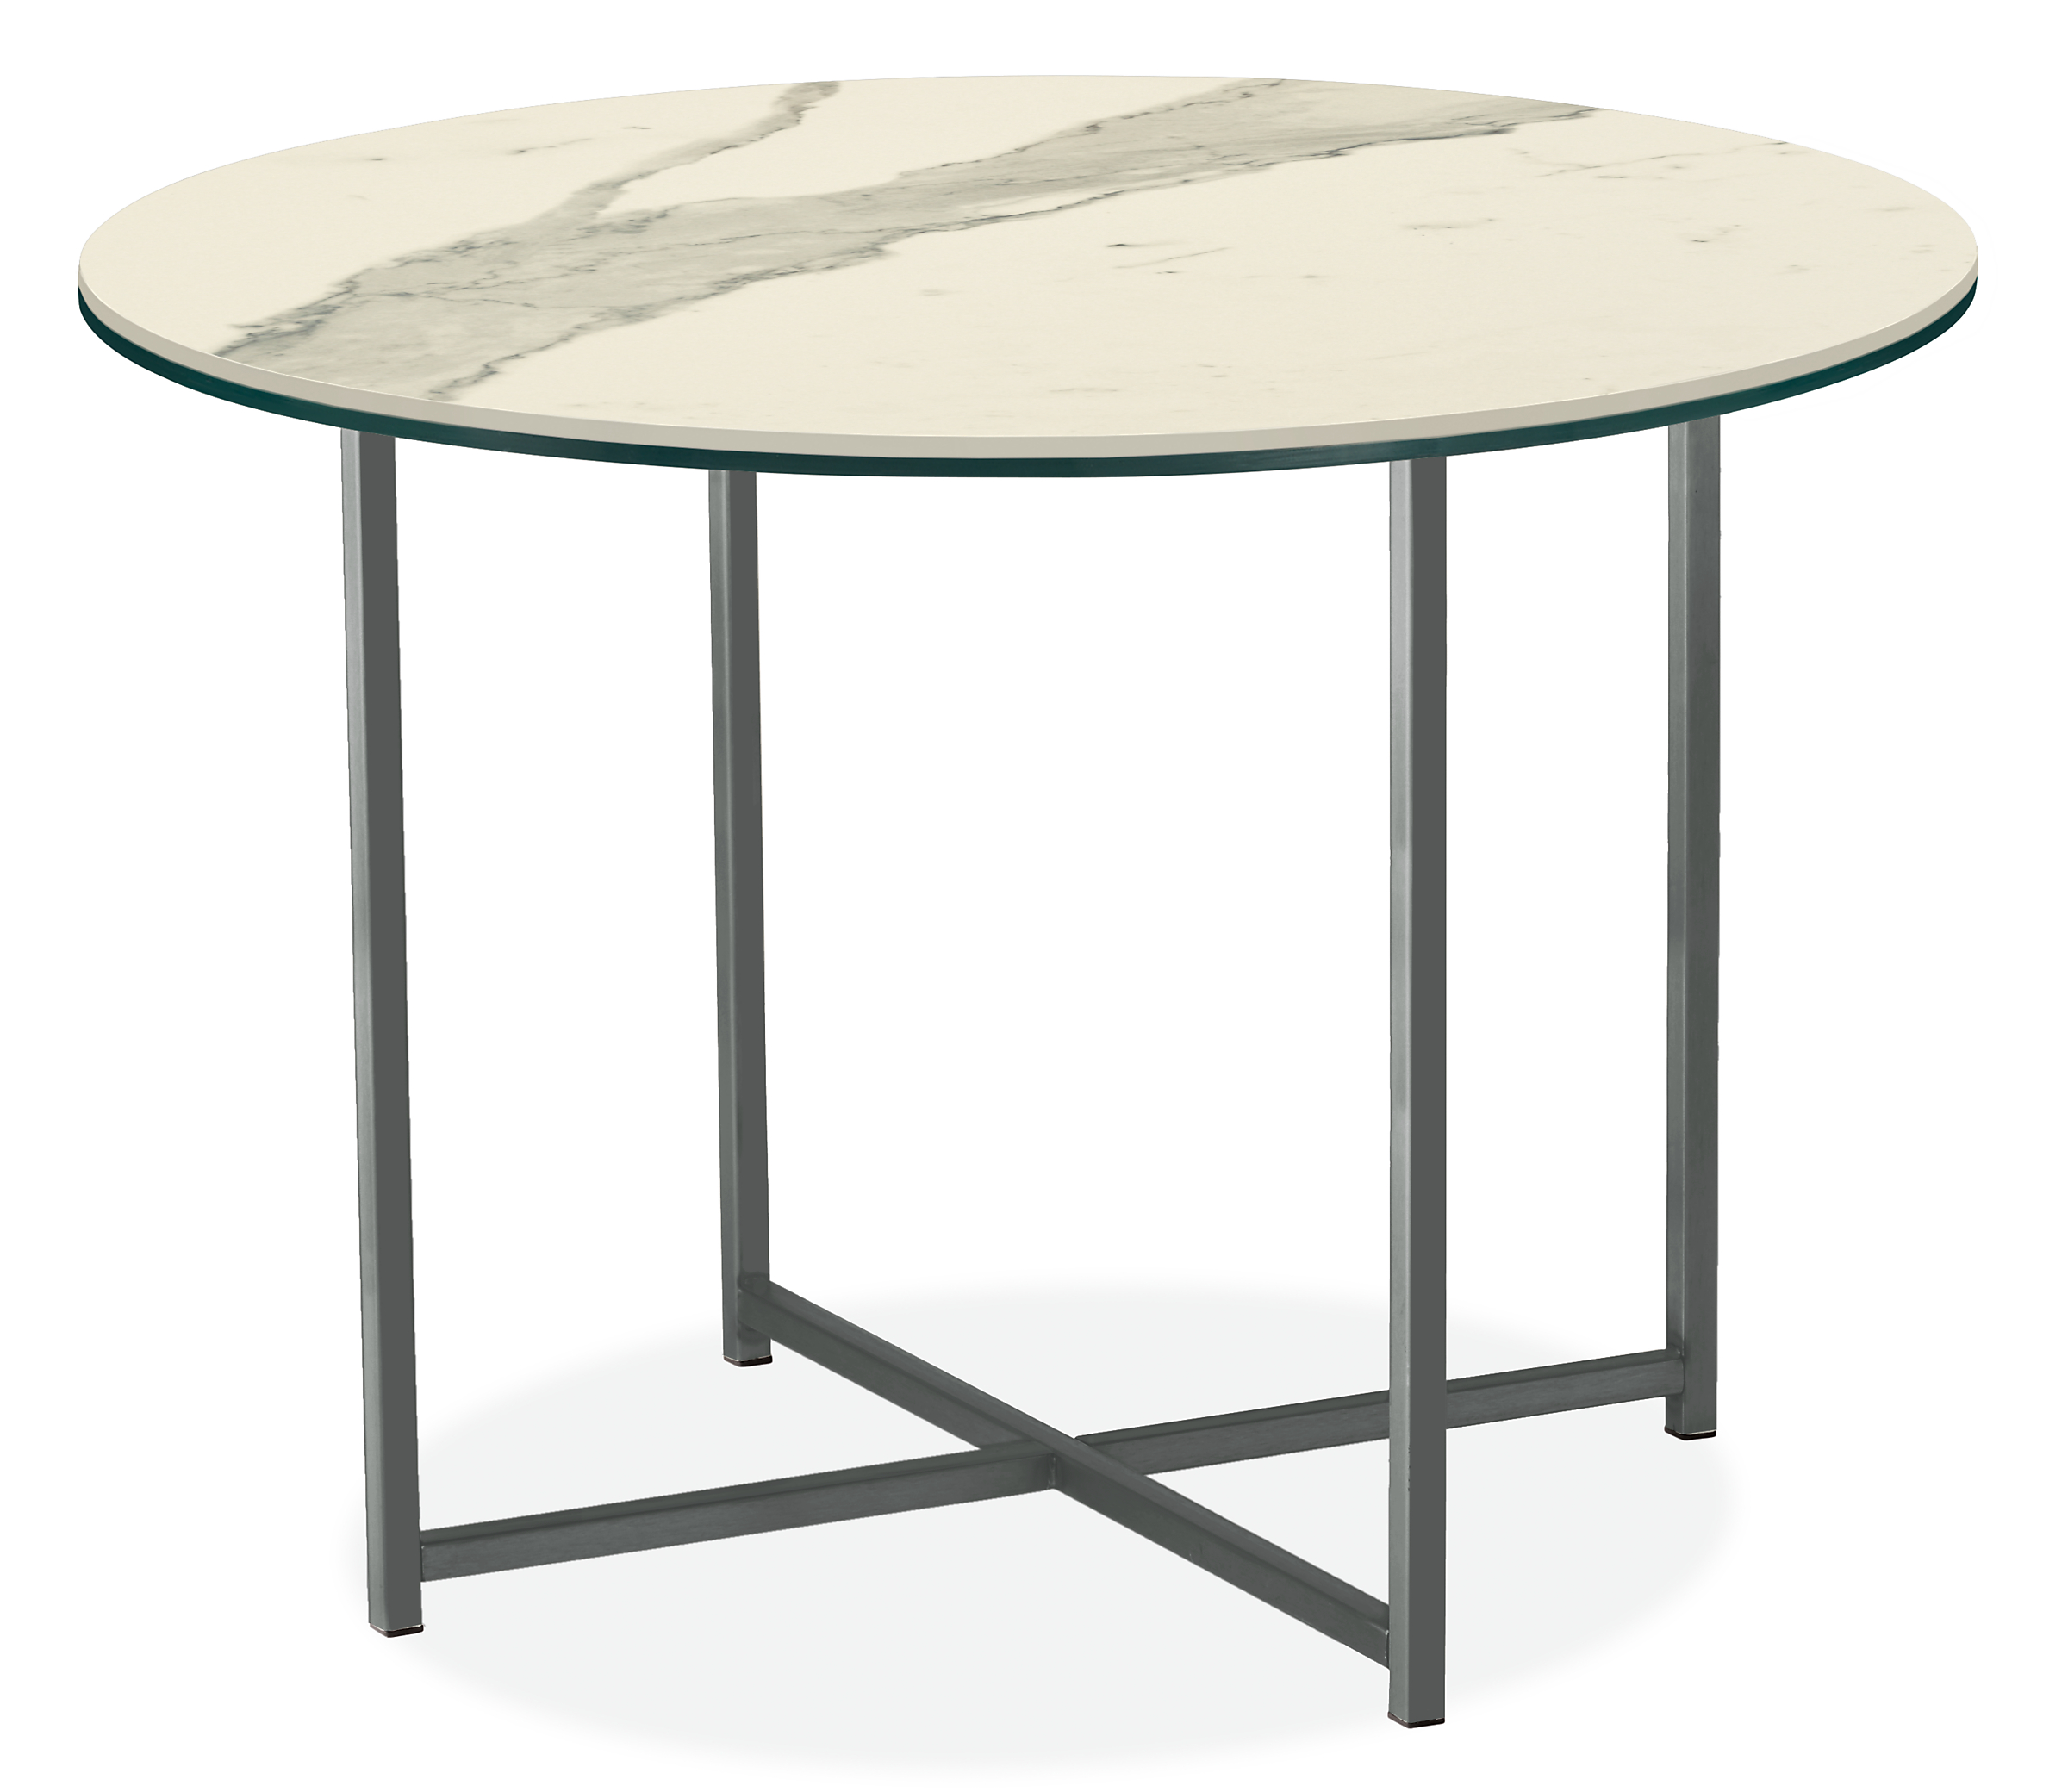 Classic 27 diam 20h Round Outdoor Side Table